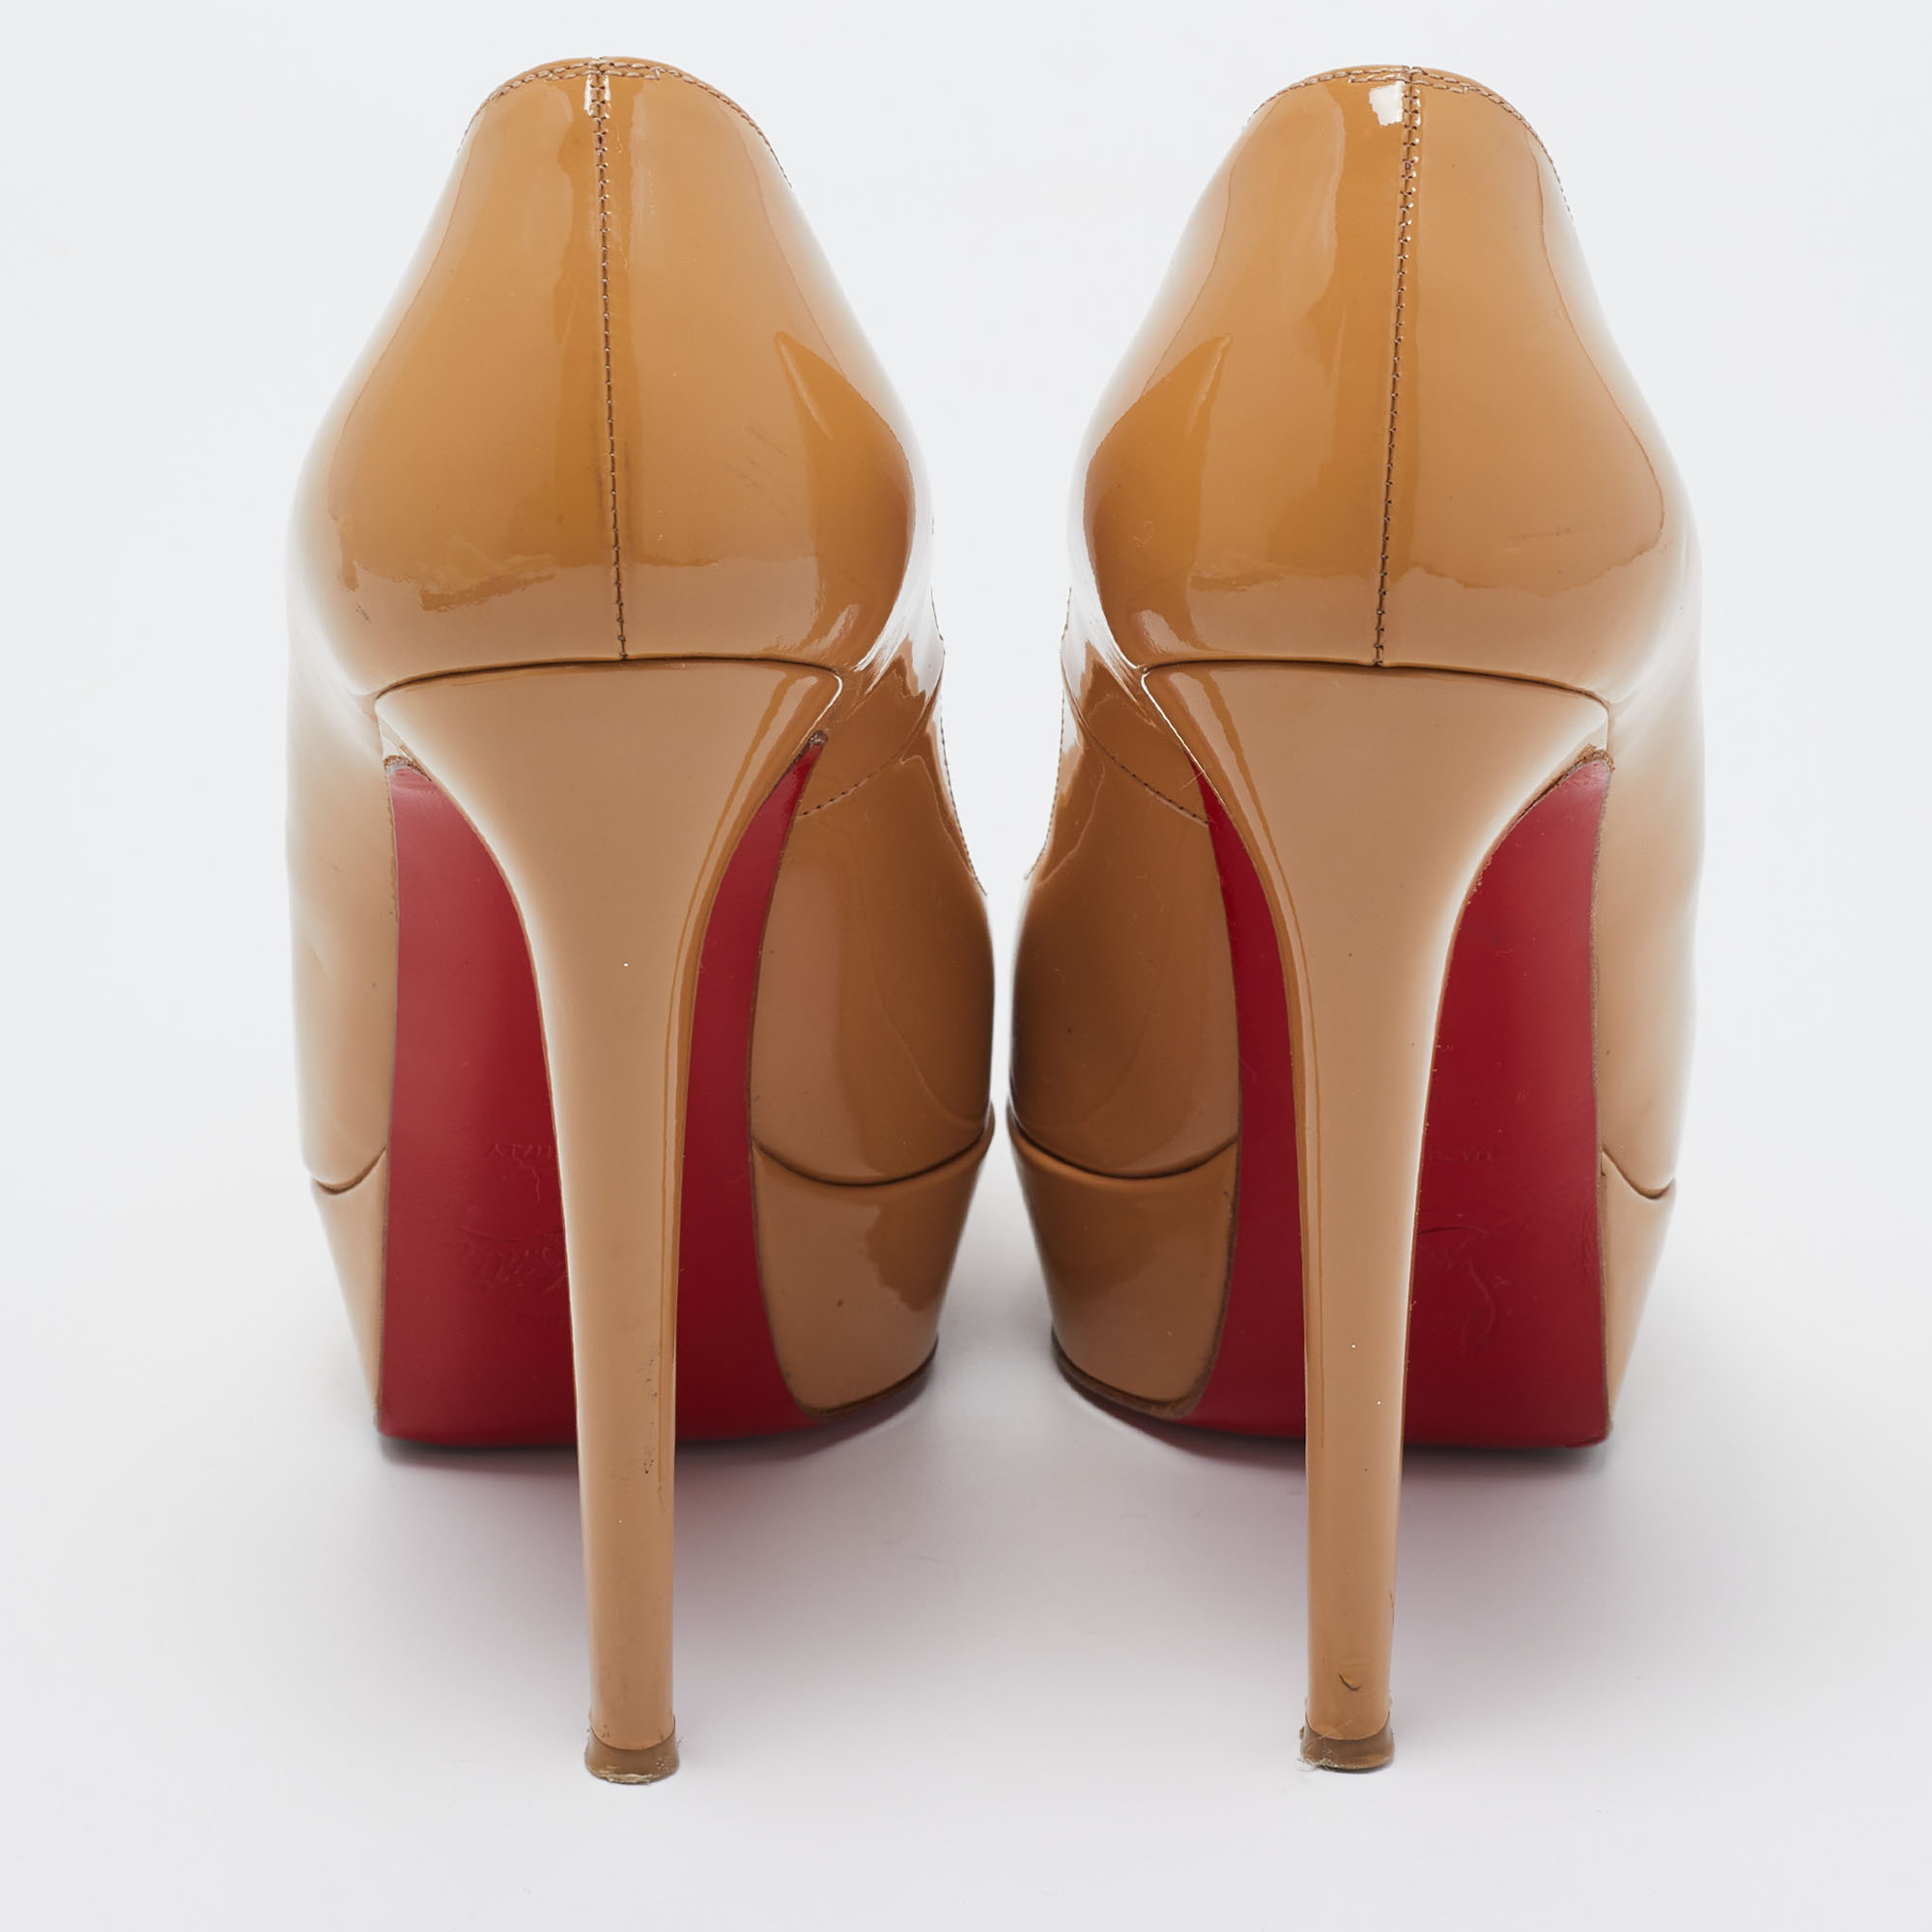 Christian Louboutin Beige Patent Leather Bianca Pumps Size 37